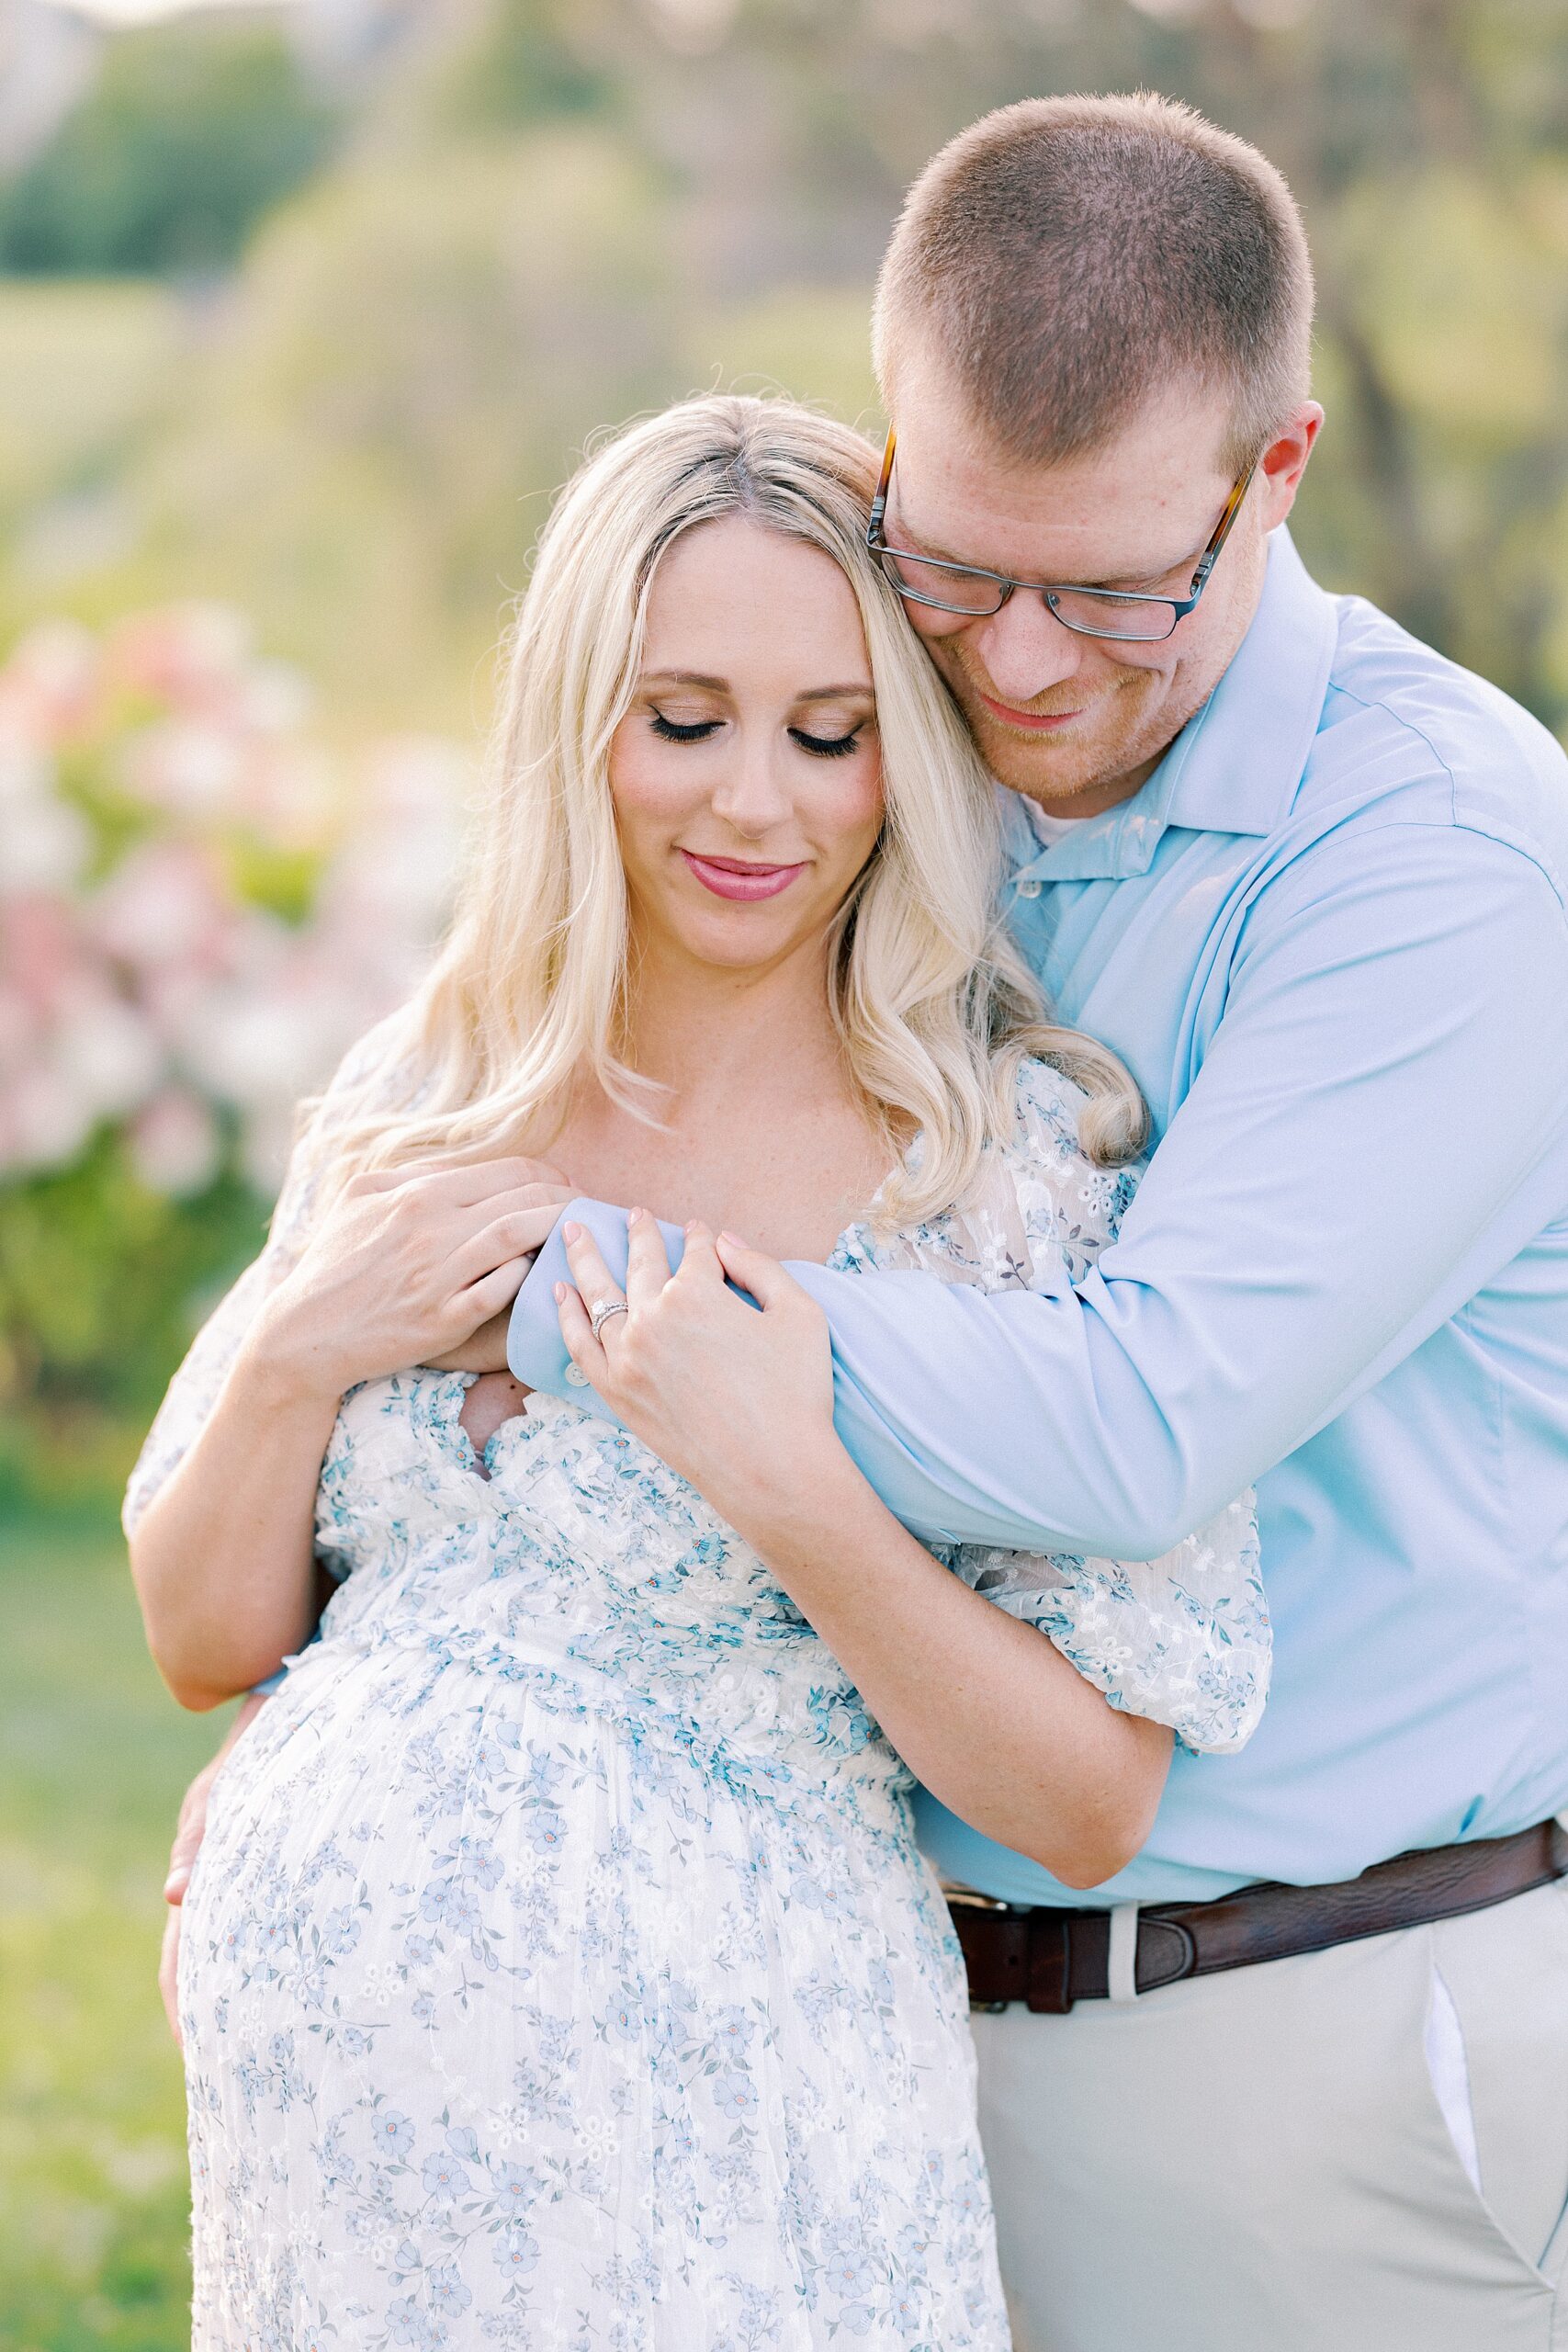 A mother to be leans into the chest of her husband in a blue floral print dress in a park at sunset